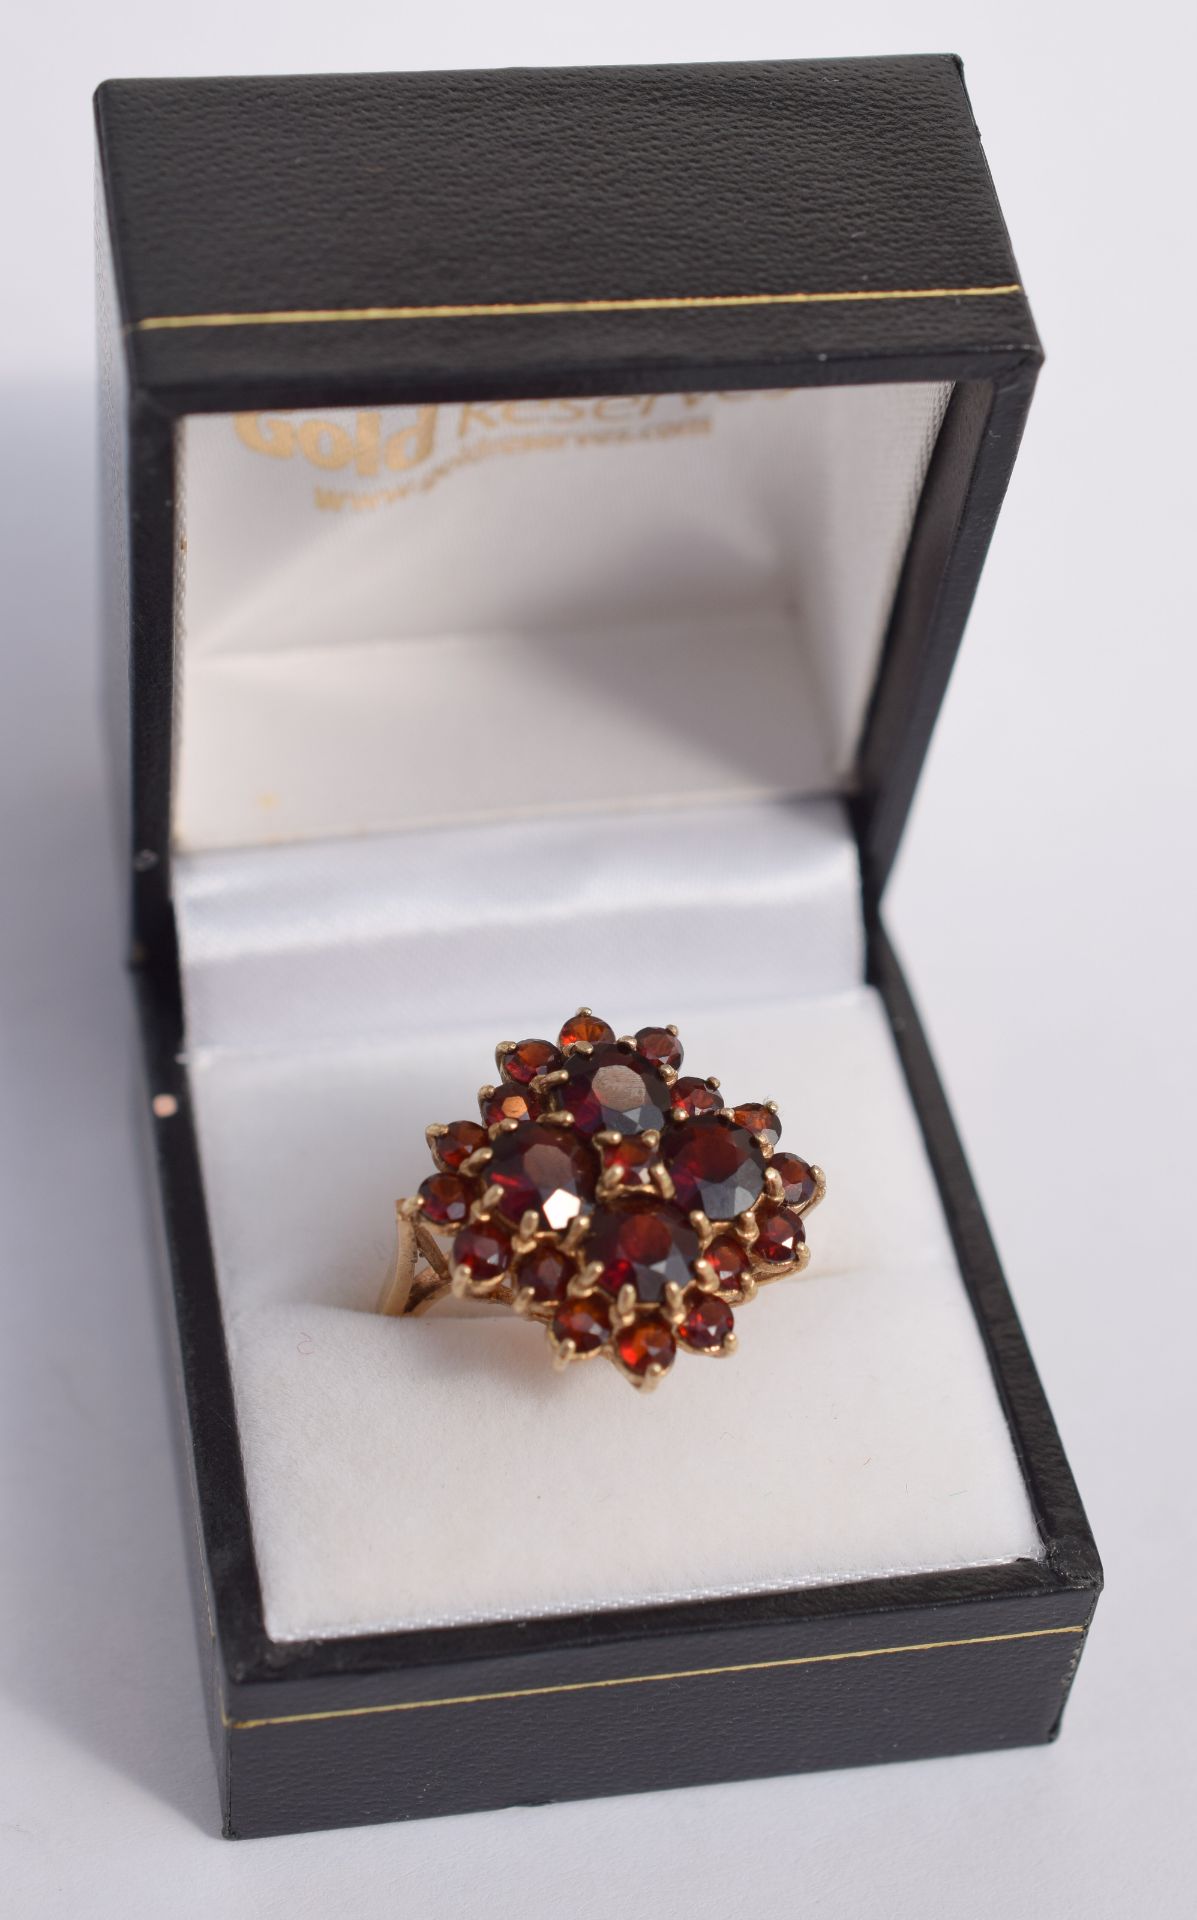 Vintage 9ct Gold Ring With 17 Small Garnets And Four Big Garnets - Image 4 of 9